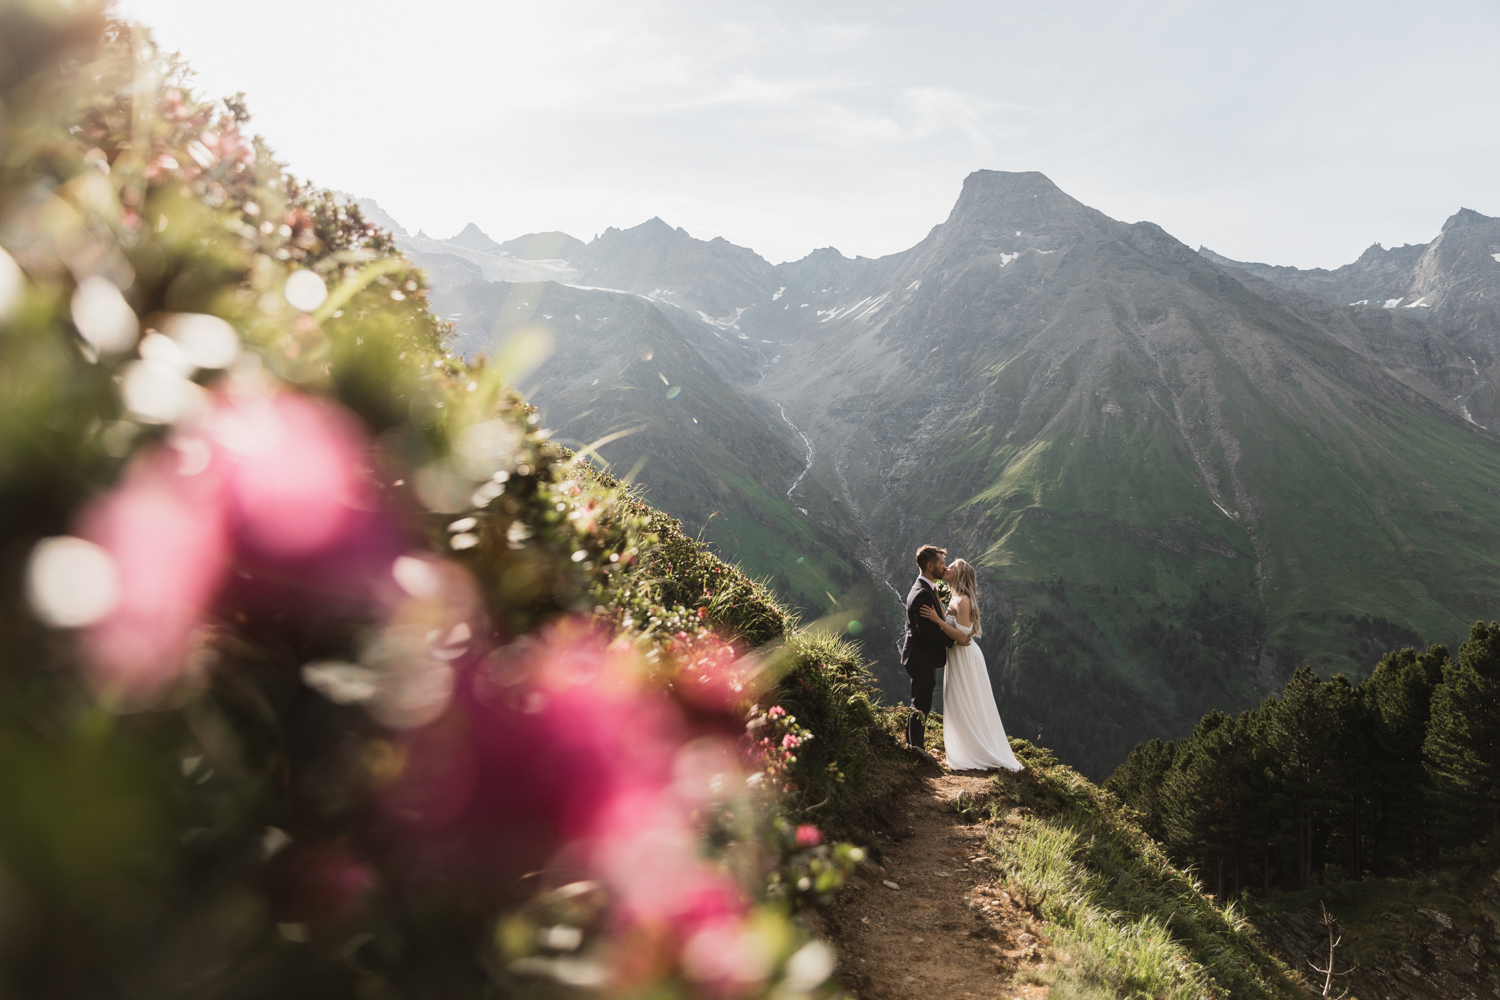 A couple stand small in the center of the frame with dramatic Austrian mountains in the background while hiking. They are framed by pink flowers in the foreground, celebrating their elopement.